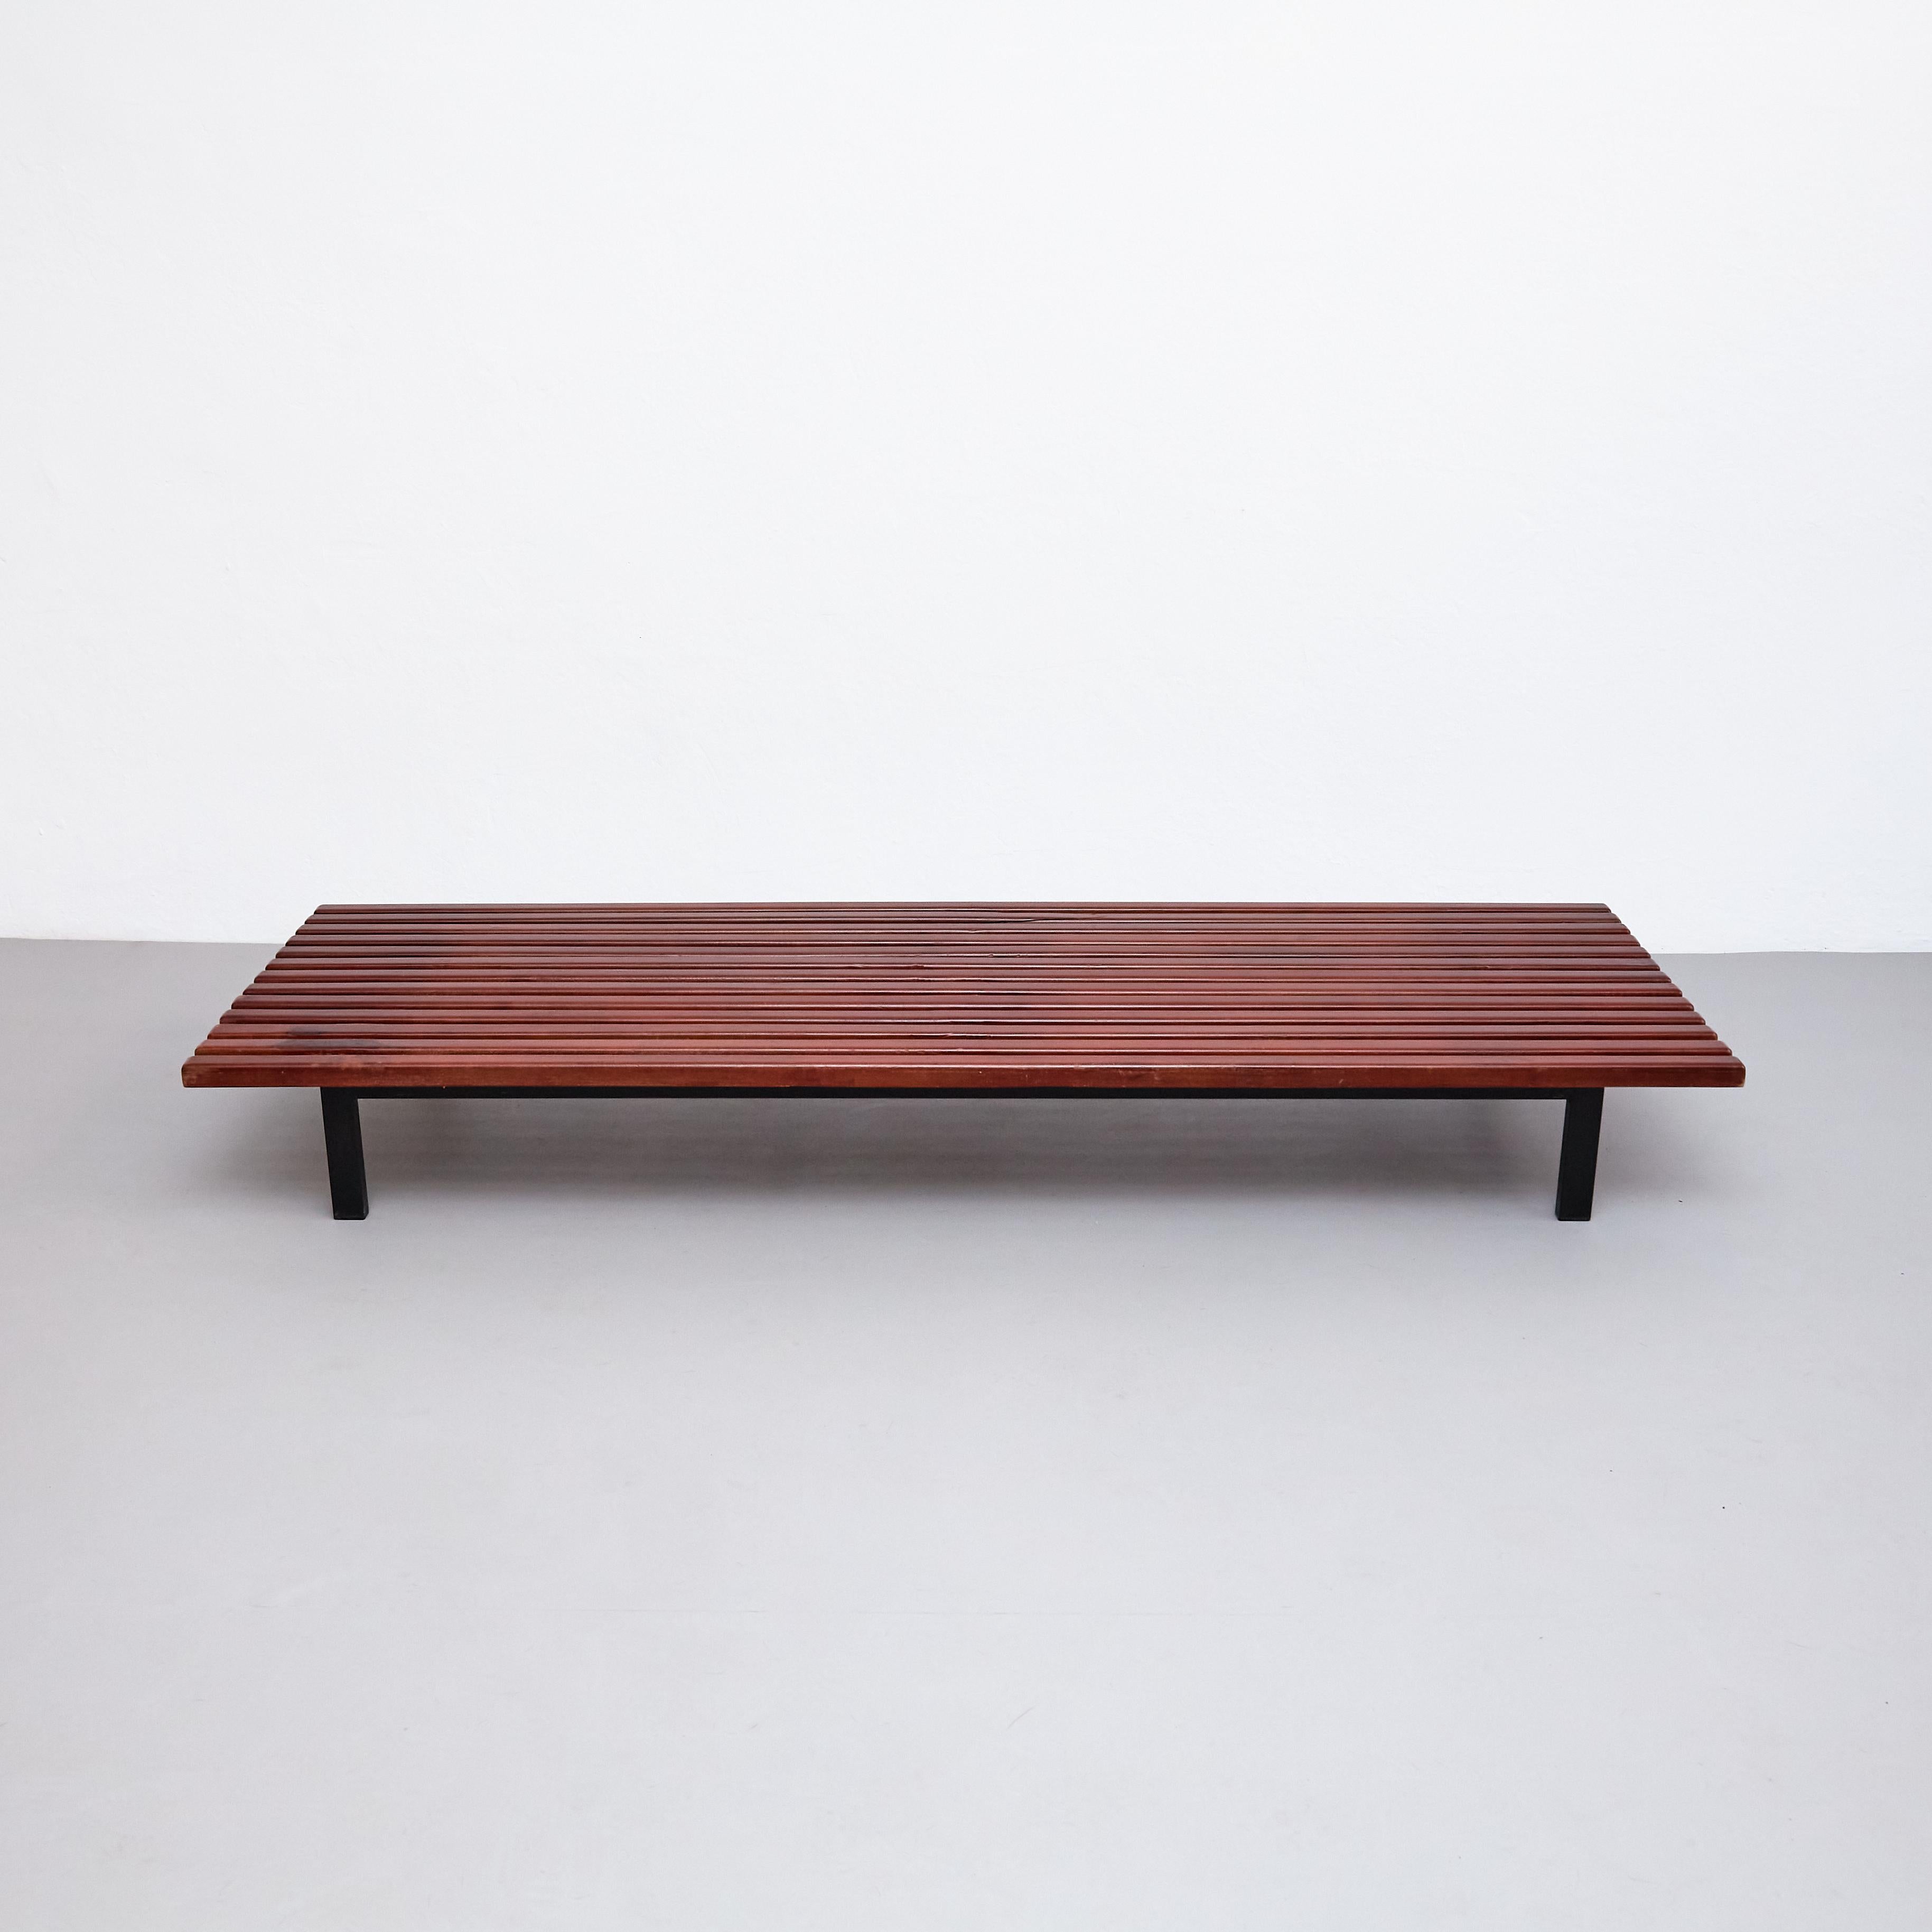 Metal Charlotte Perriand Cansado Bench, circa 1950 For Sale